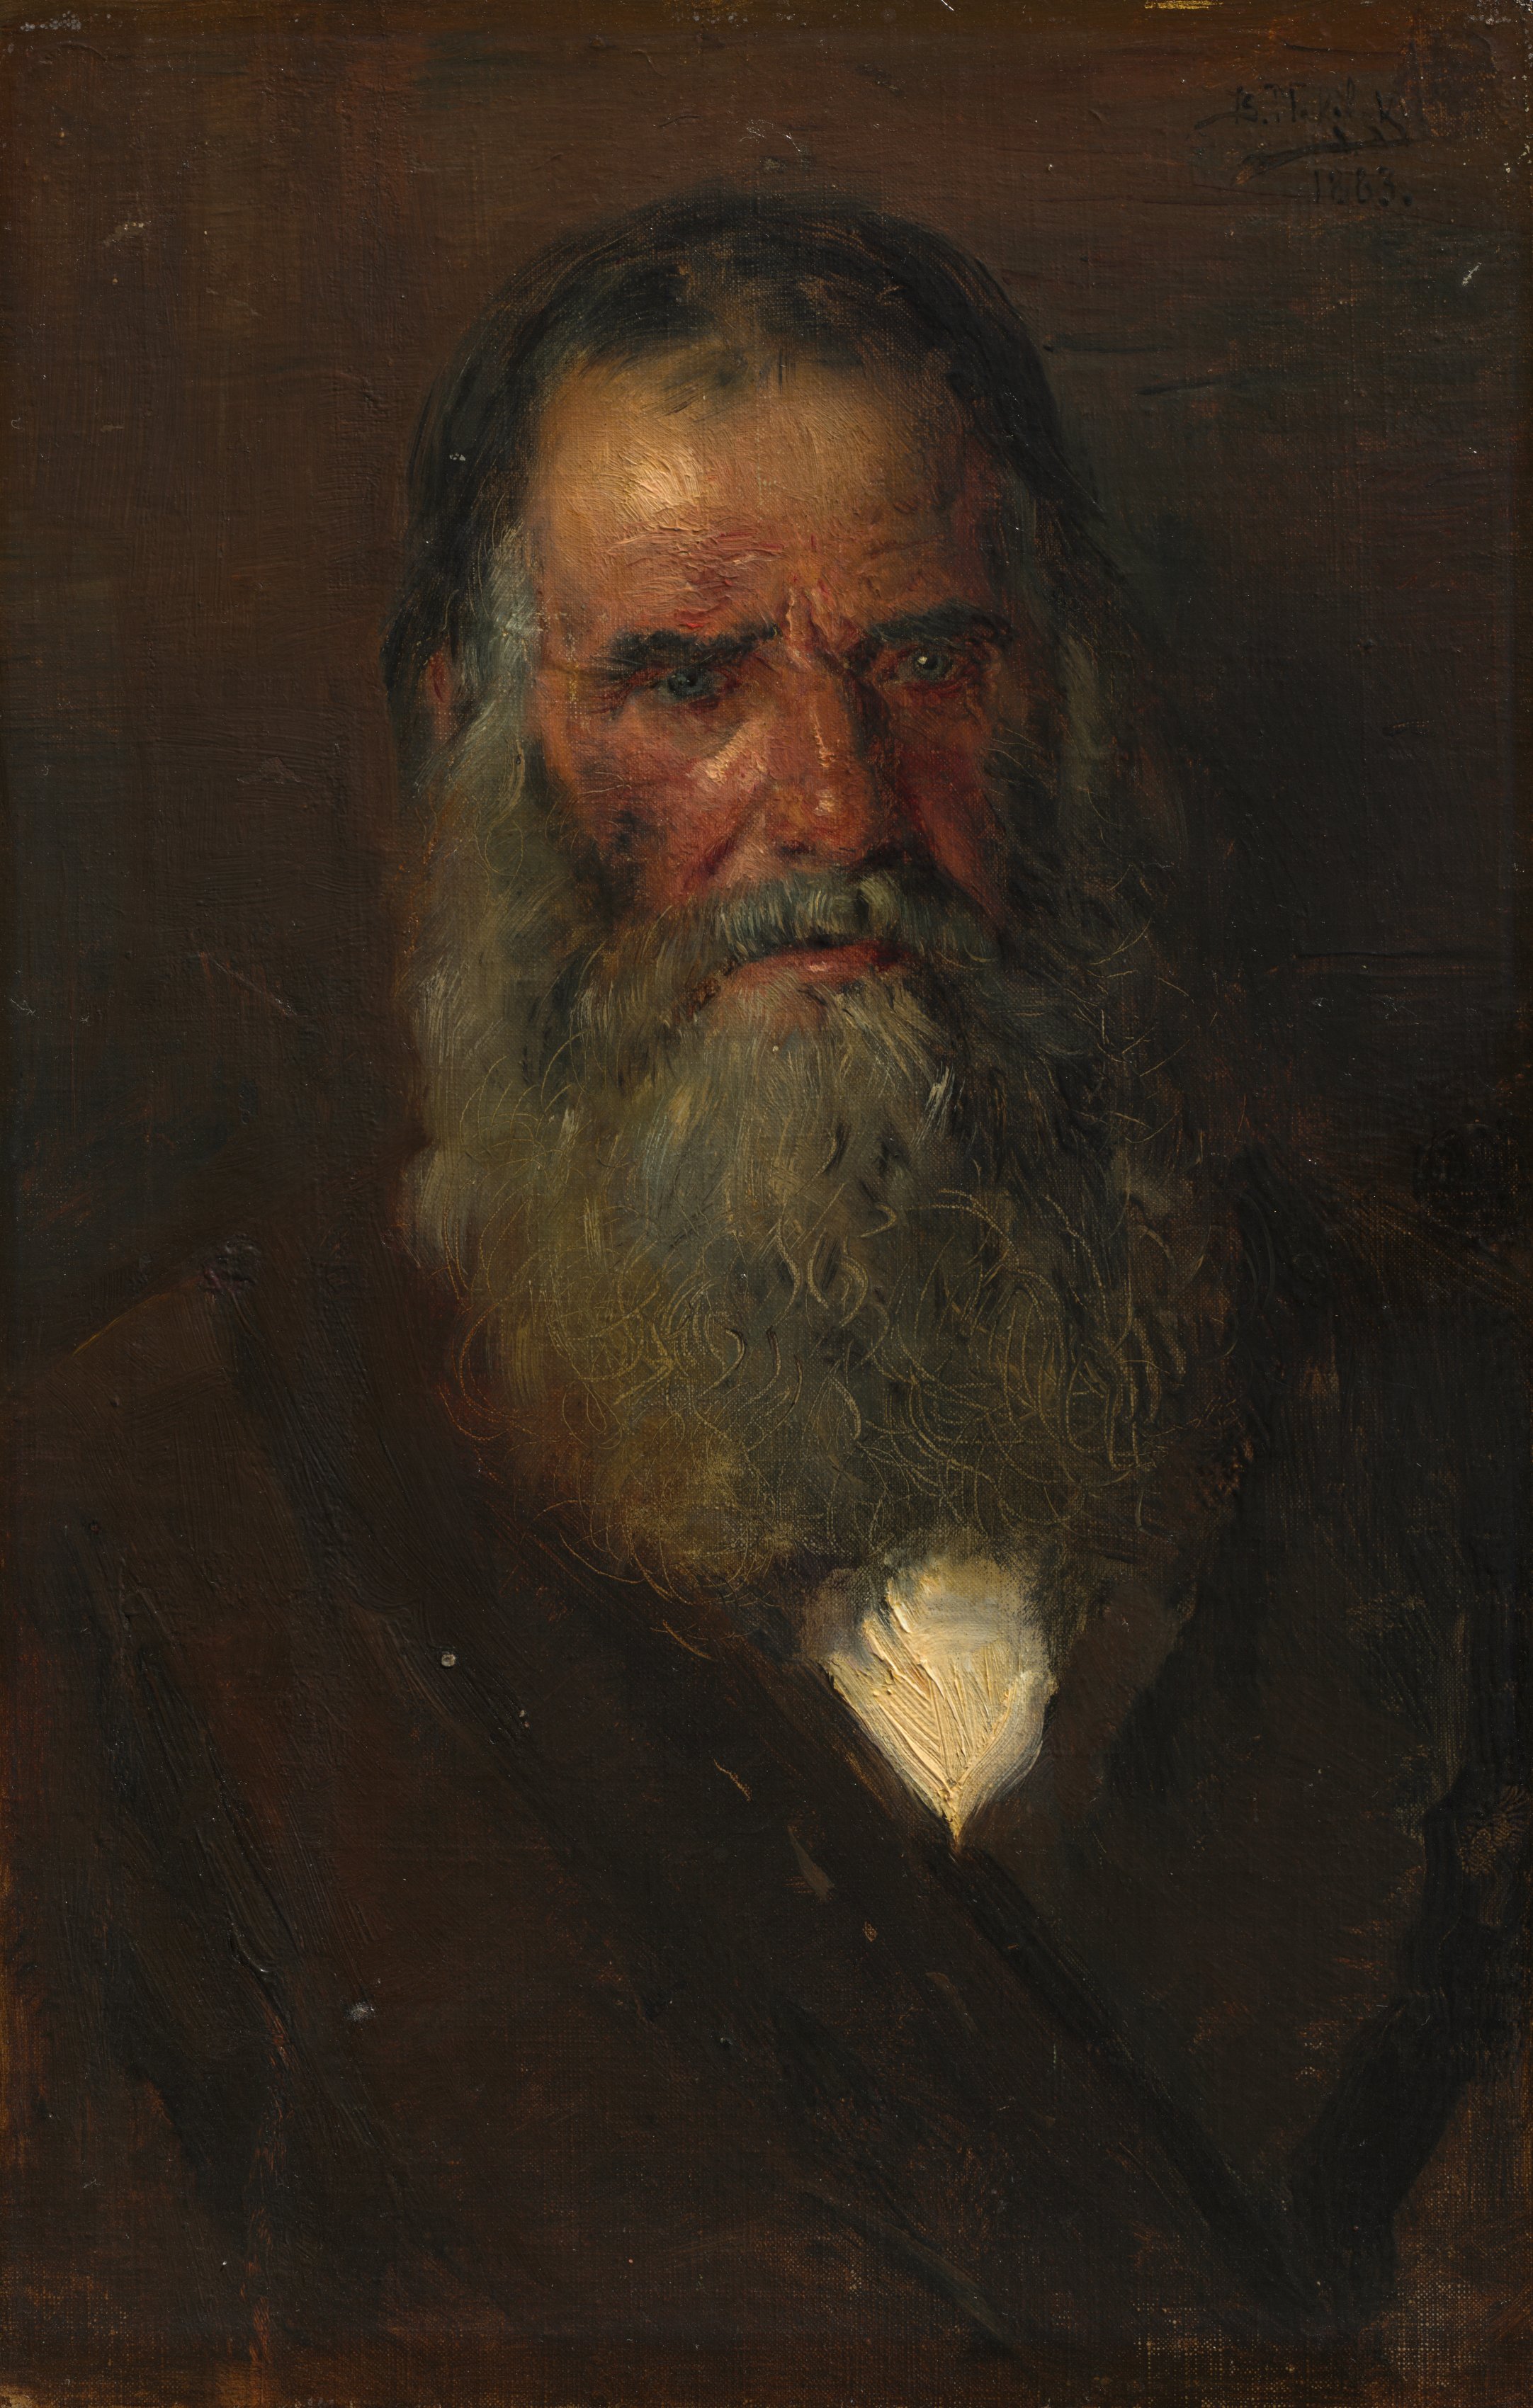 Study of the Head of an Old Man